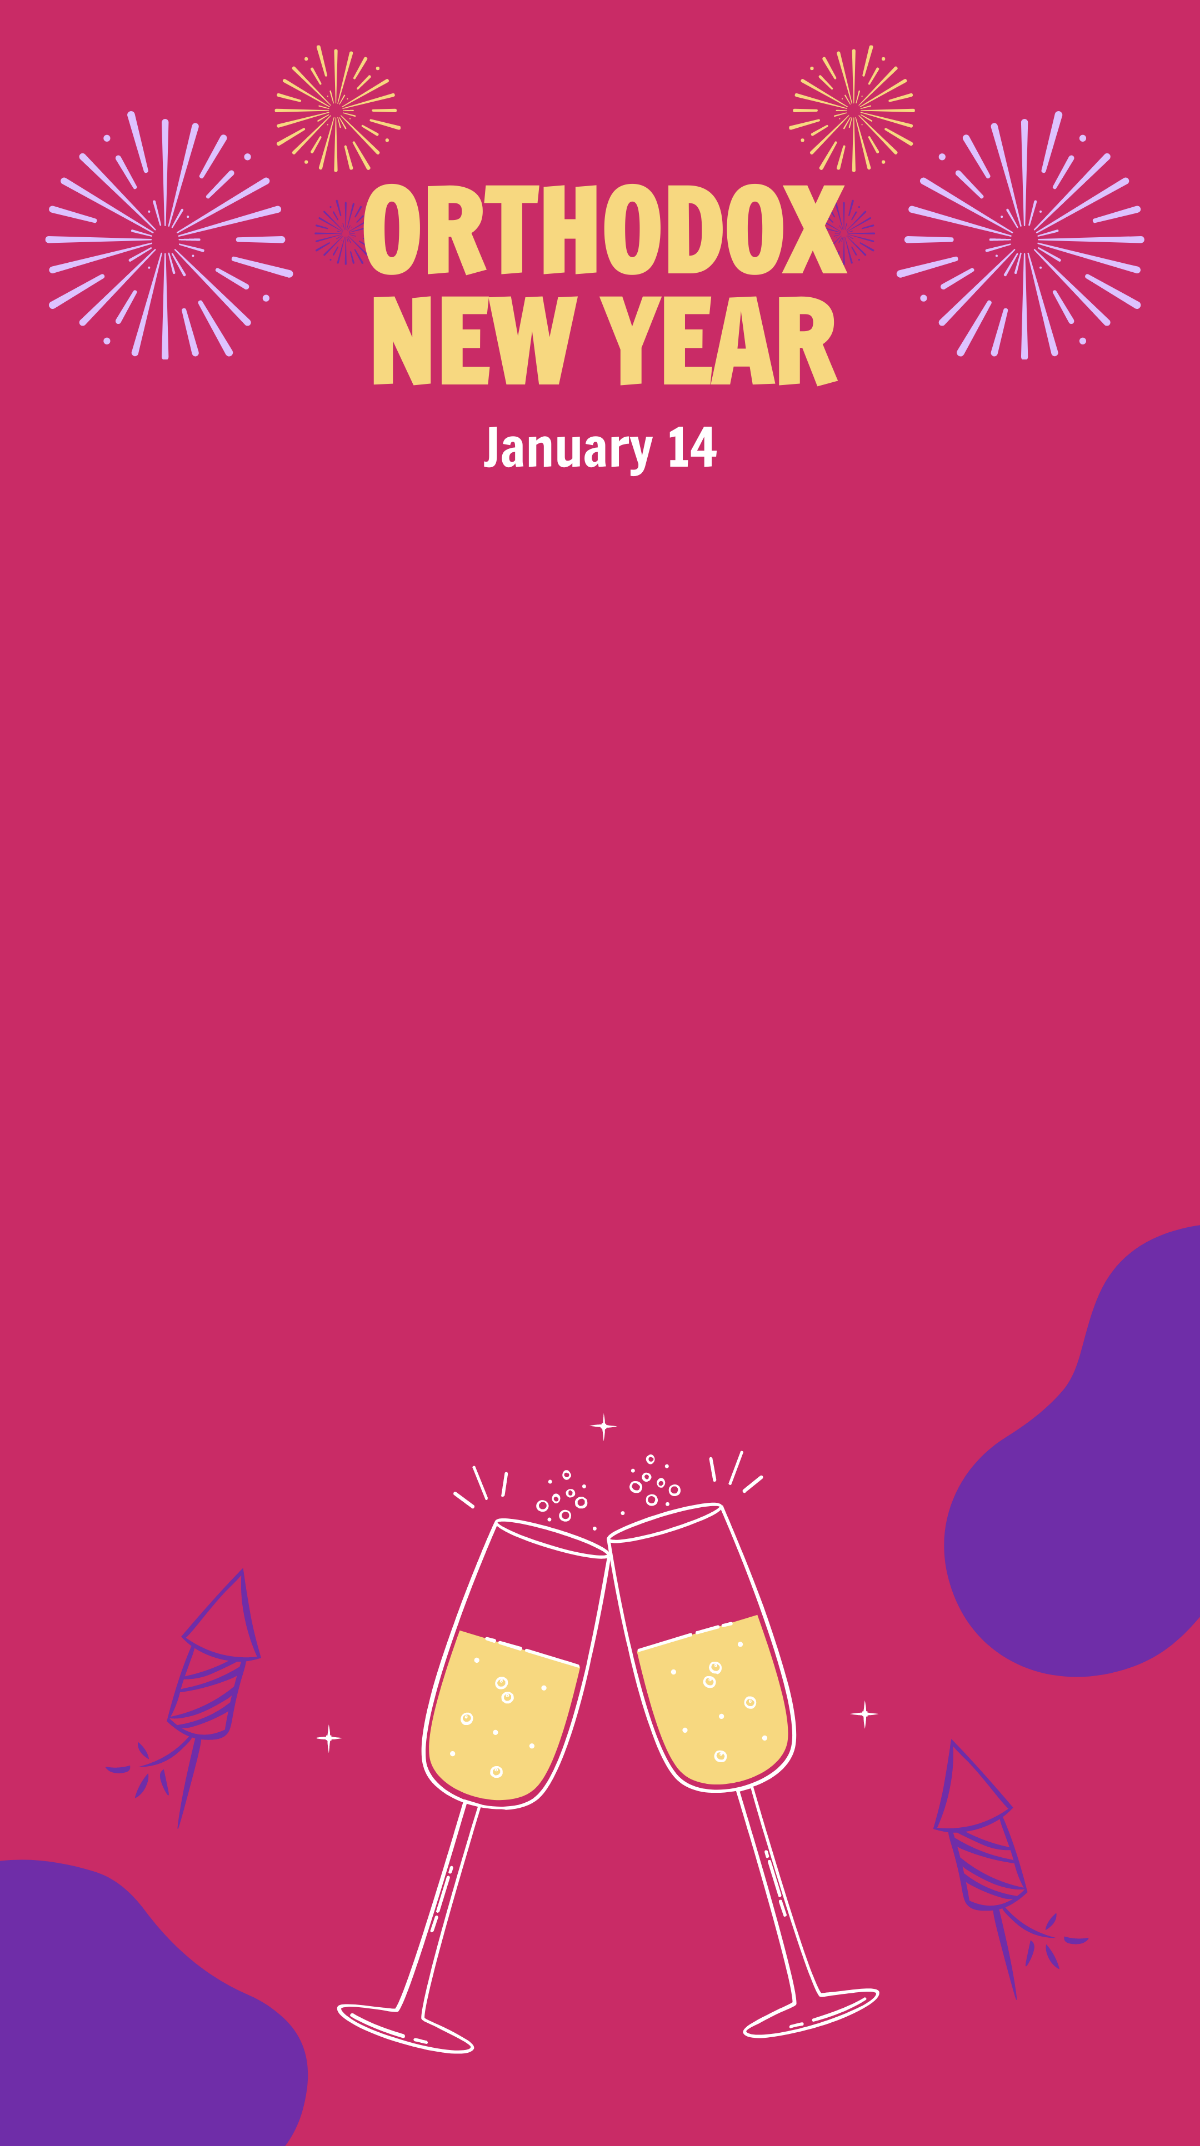 Free Happy Orthodox New Year Snapchat Geofilter Template